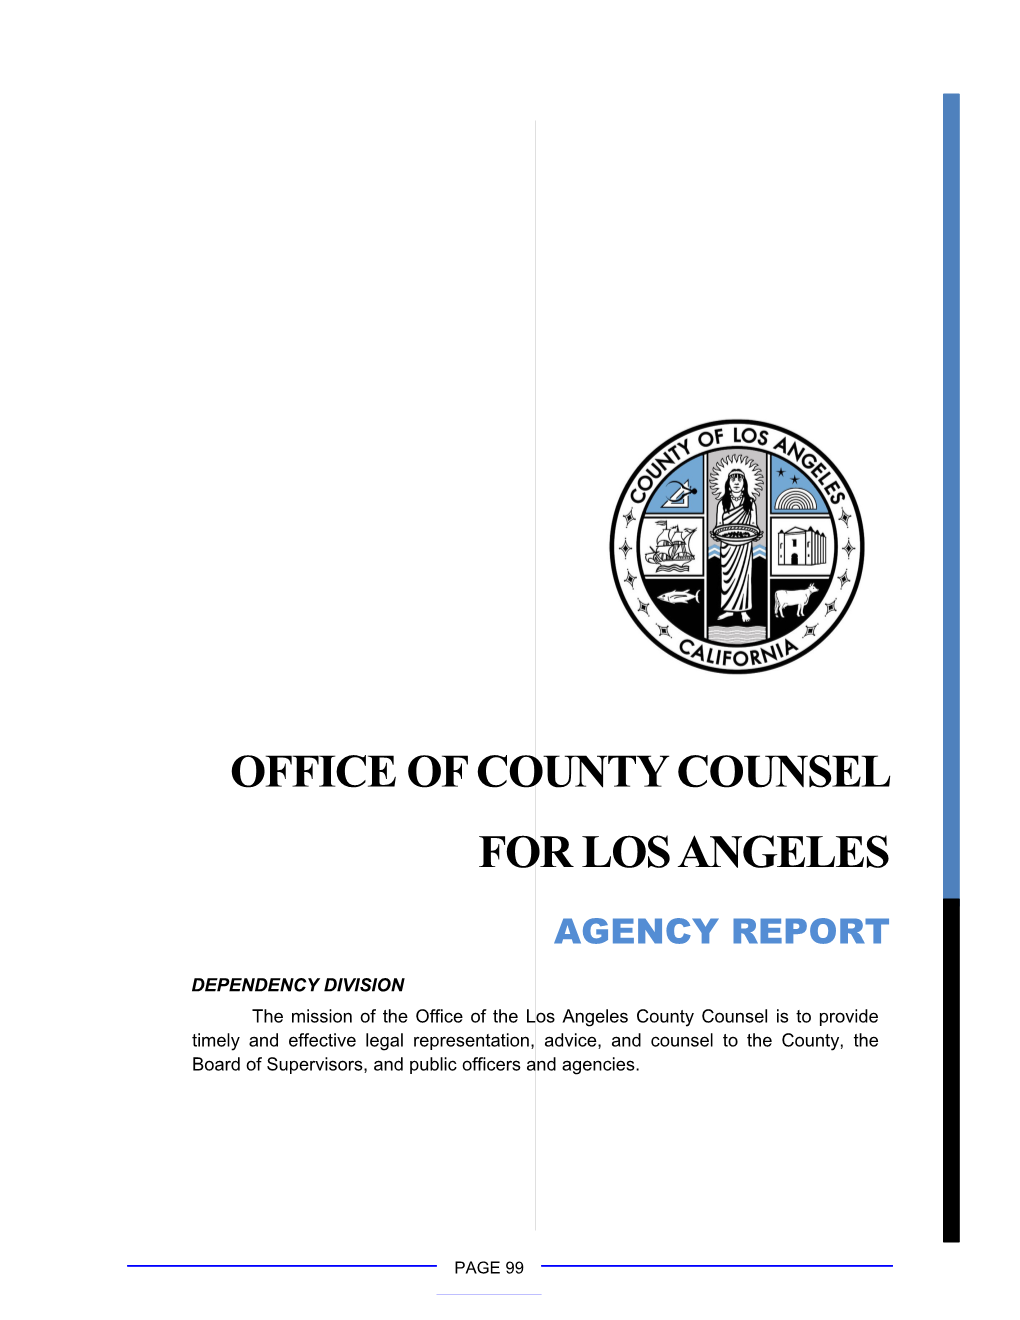 Office of County Counsel for Los Angeles